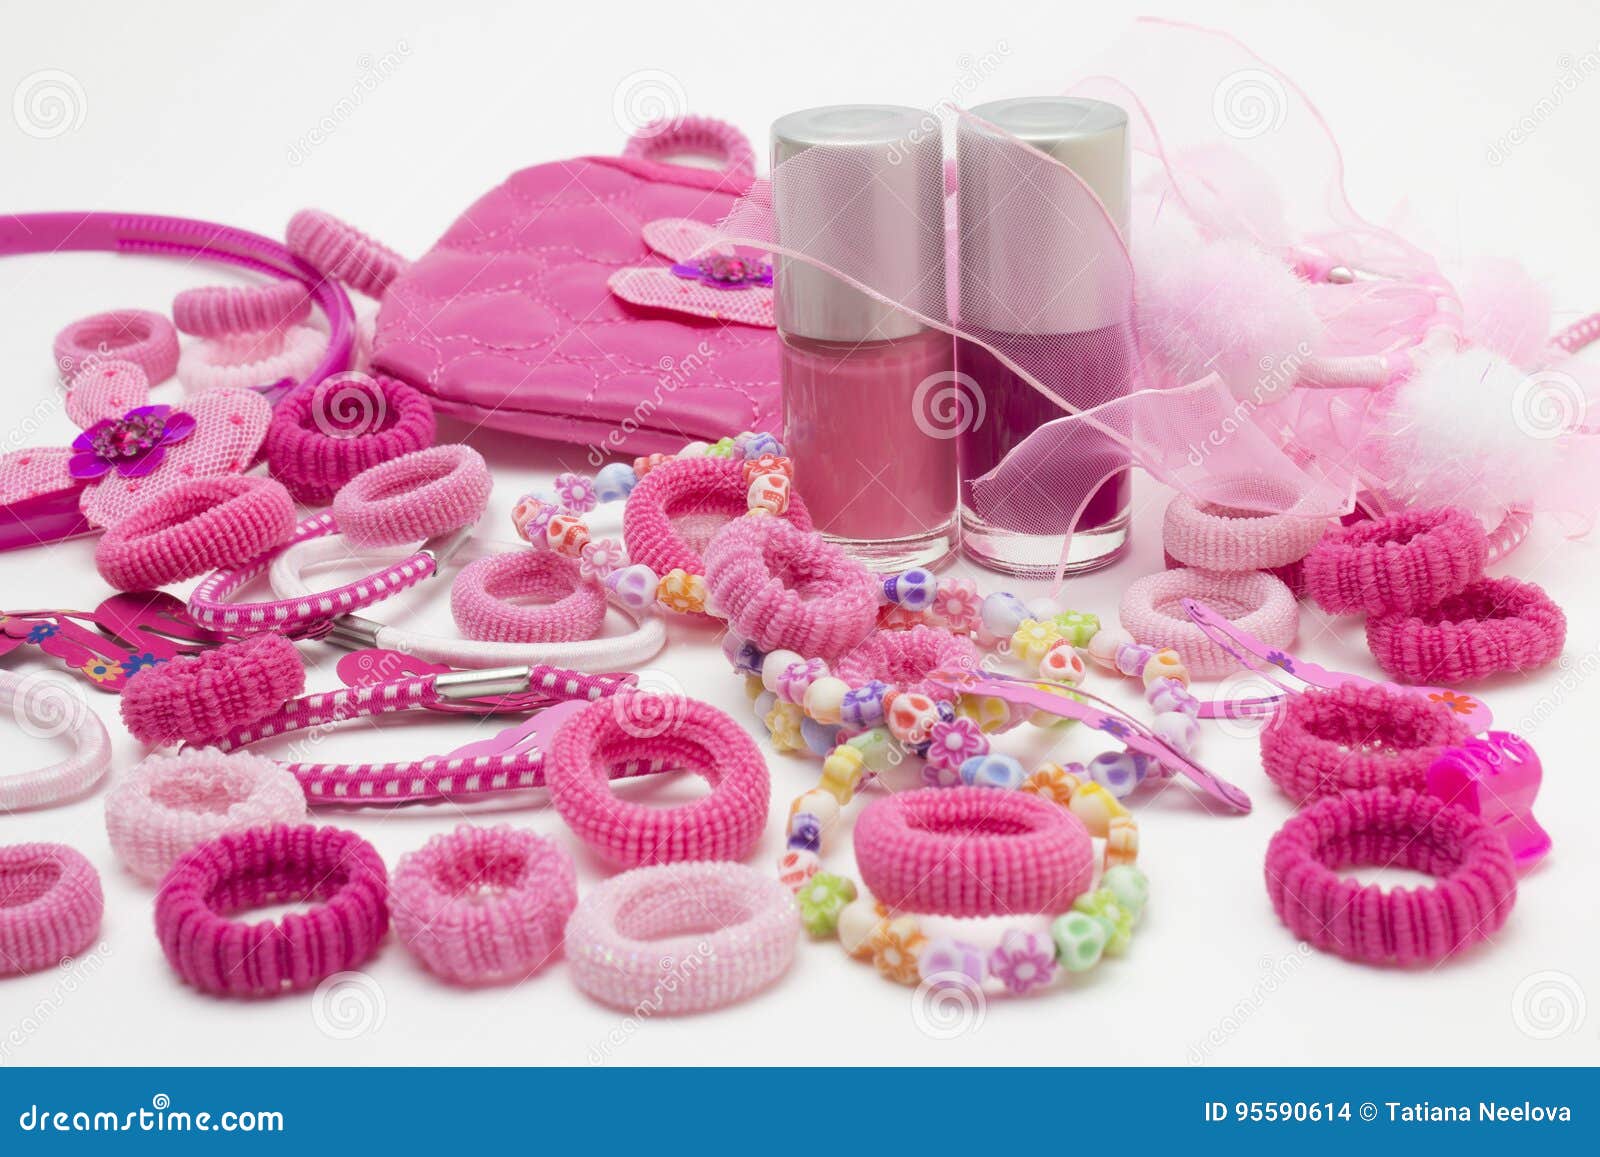 https://thumbs.dreamstime.com/z/pink-fashion-girly-hair-nail-accessories-clips-band-ribbons-pins-bow-teenager-hair-clippers-grips-little-girl-95590614.jpg